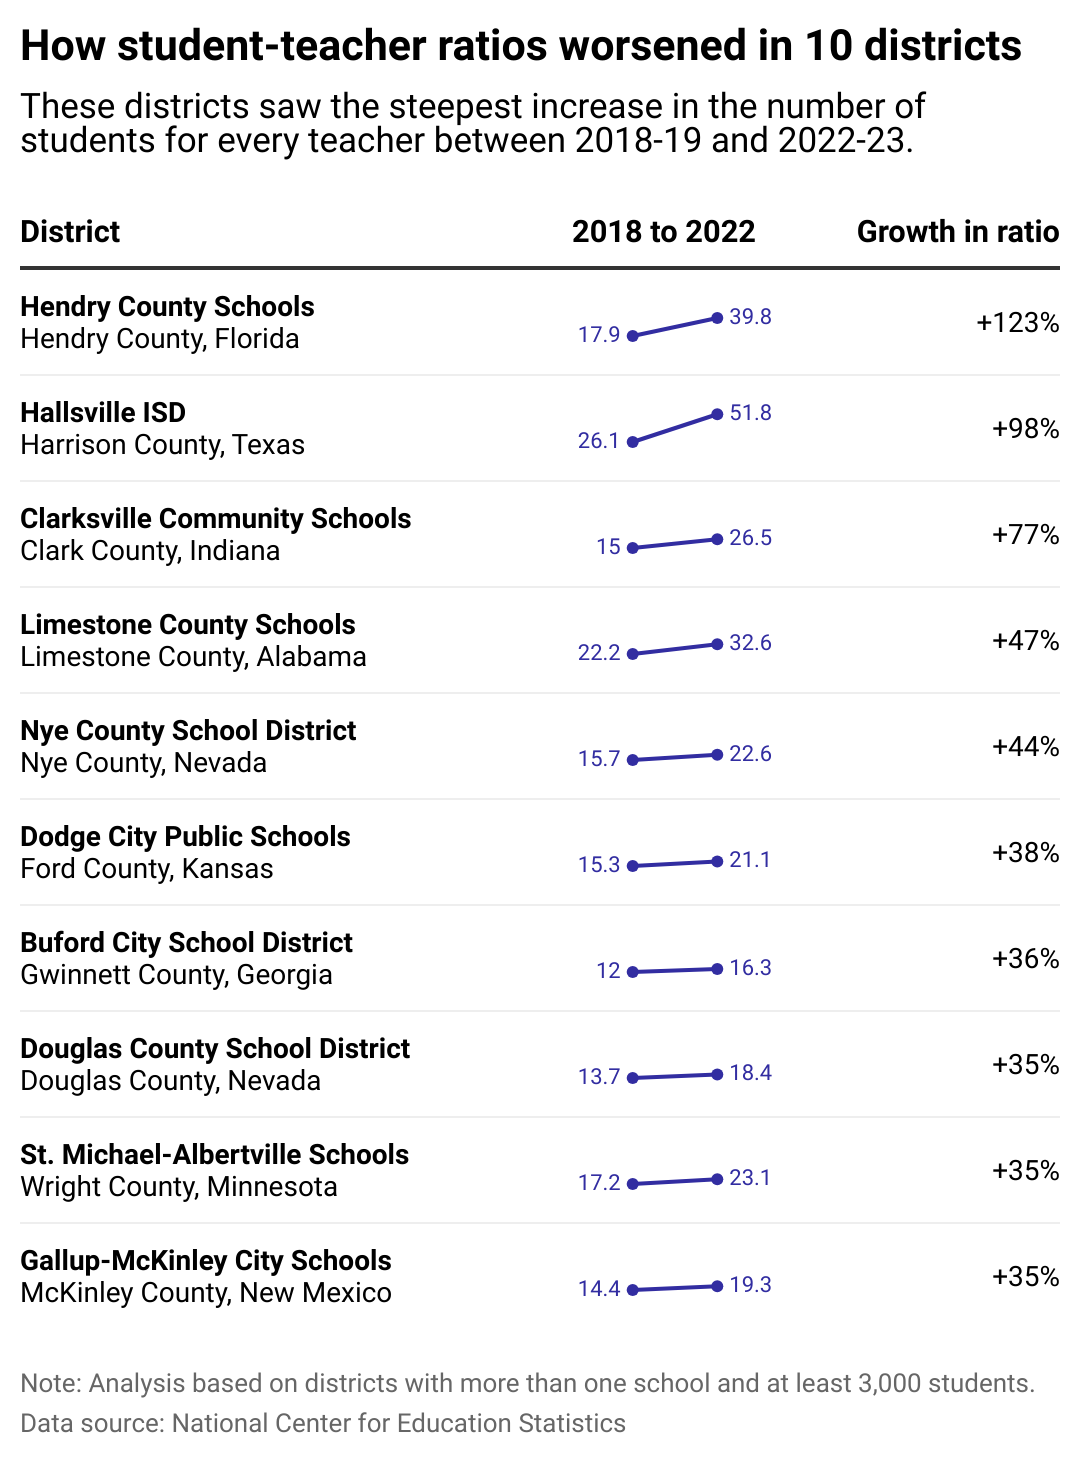 A data table showing how student-teacher ratios worsened in 10 districts. Among districts with multiple schools and at least 3,000 students, these districts saw the steepest increase in the number of students for every teacher: Hendry County, Hallsville ISD, Clarksville Community, Limestone County, Nye County, Dodge City, Buford City, Douglas County, St. Michael-Albertville, and Gallup-McKinley City.